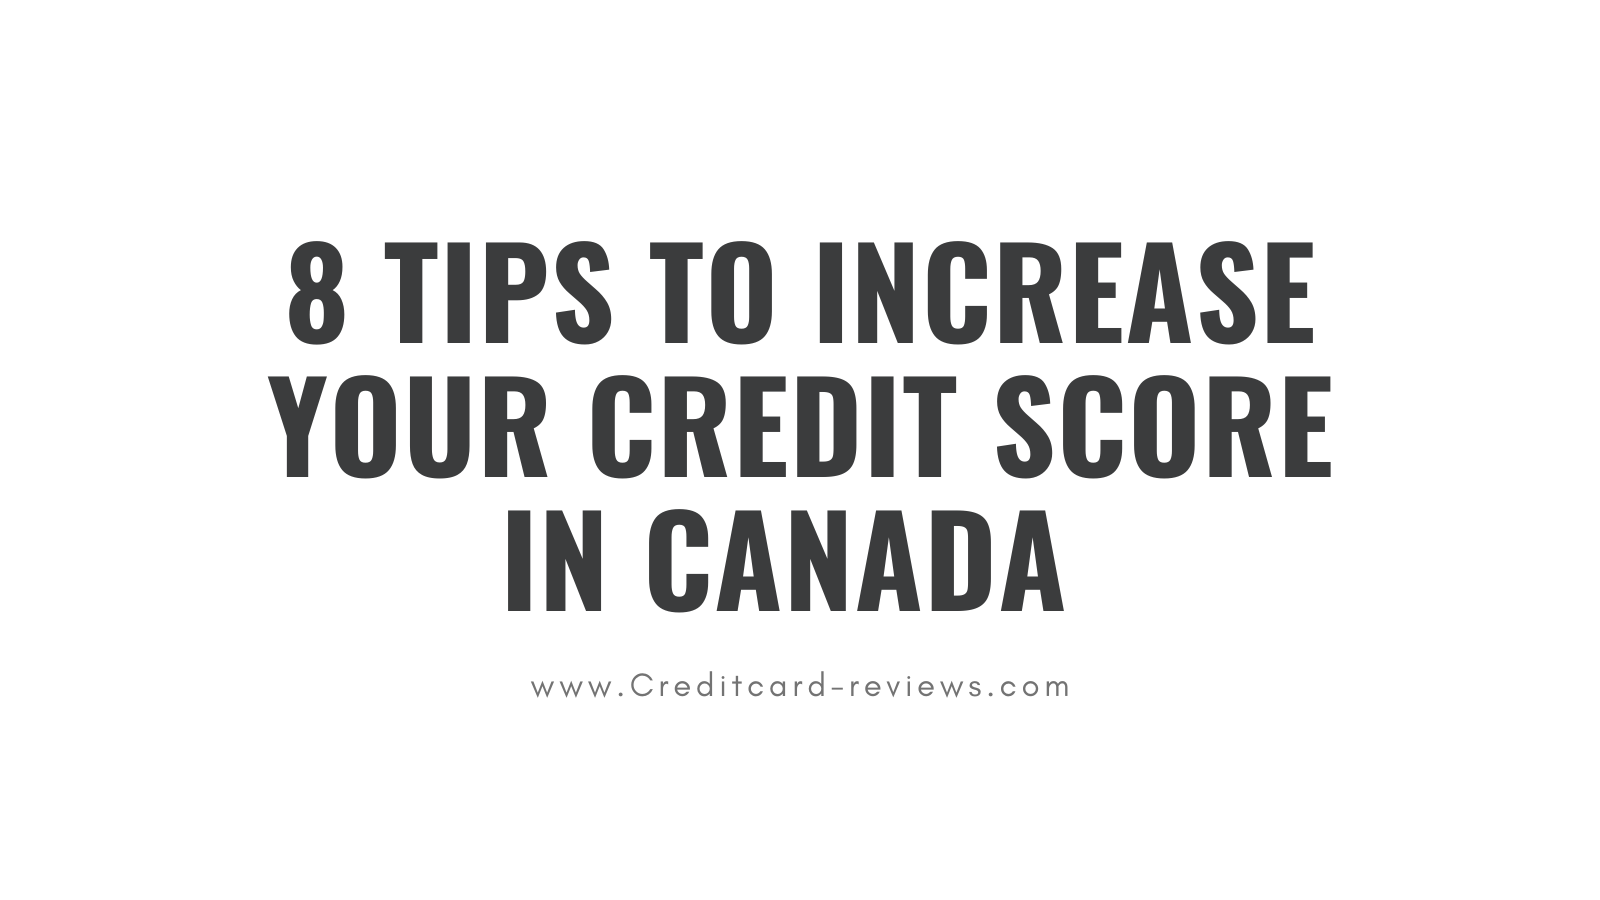 8 Tips To Increase Your Credit Score in Canada